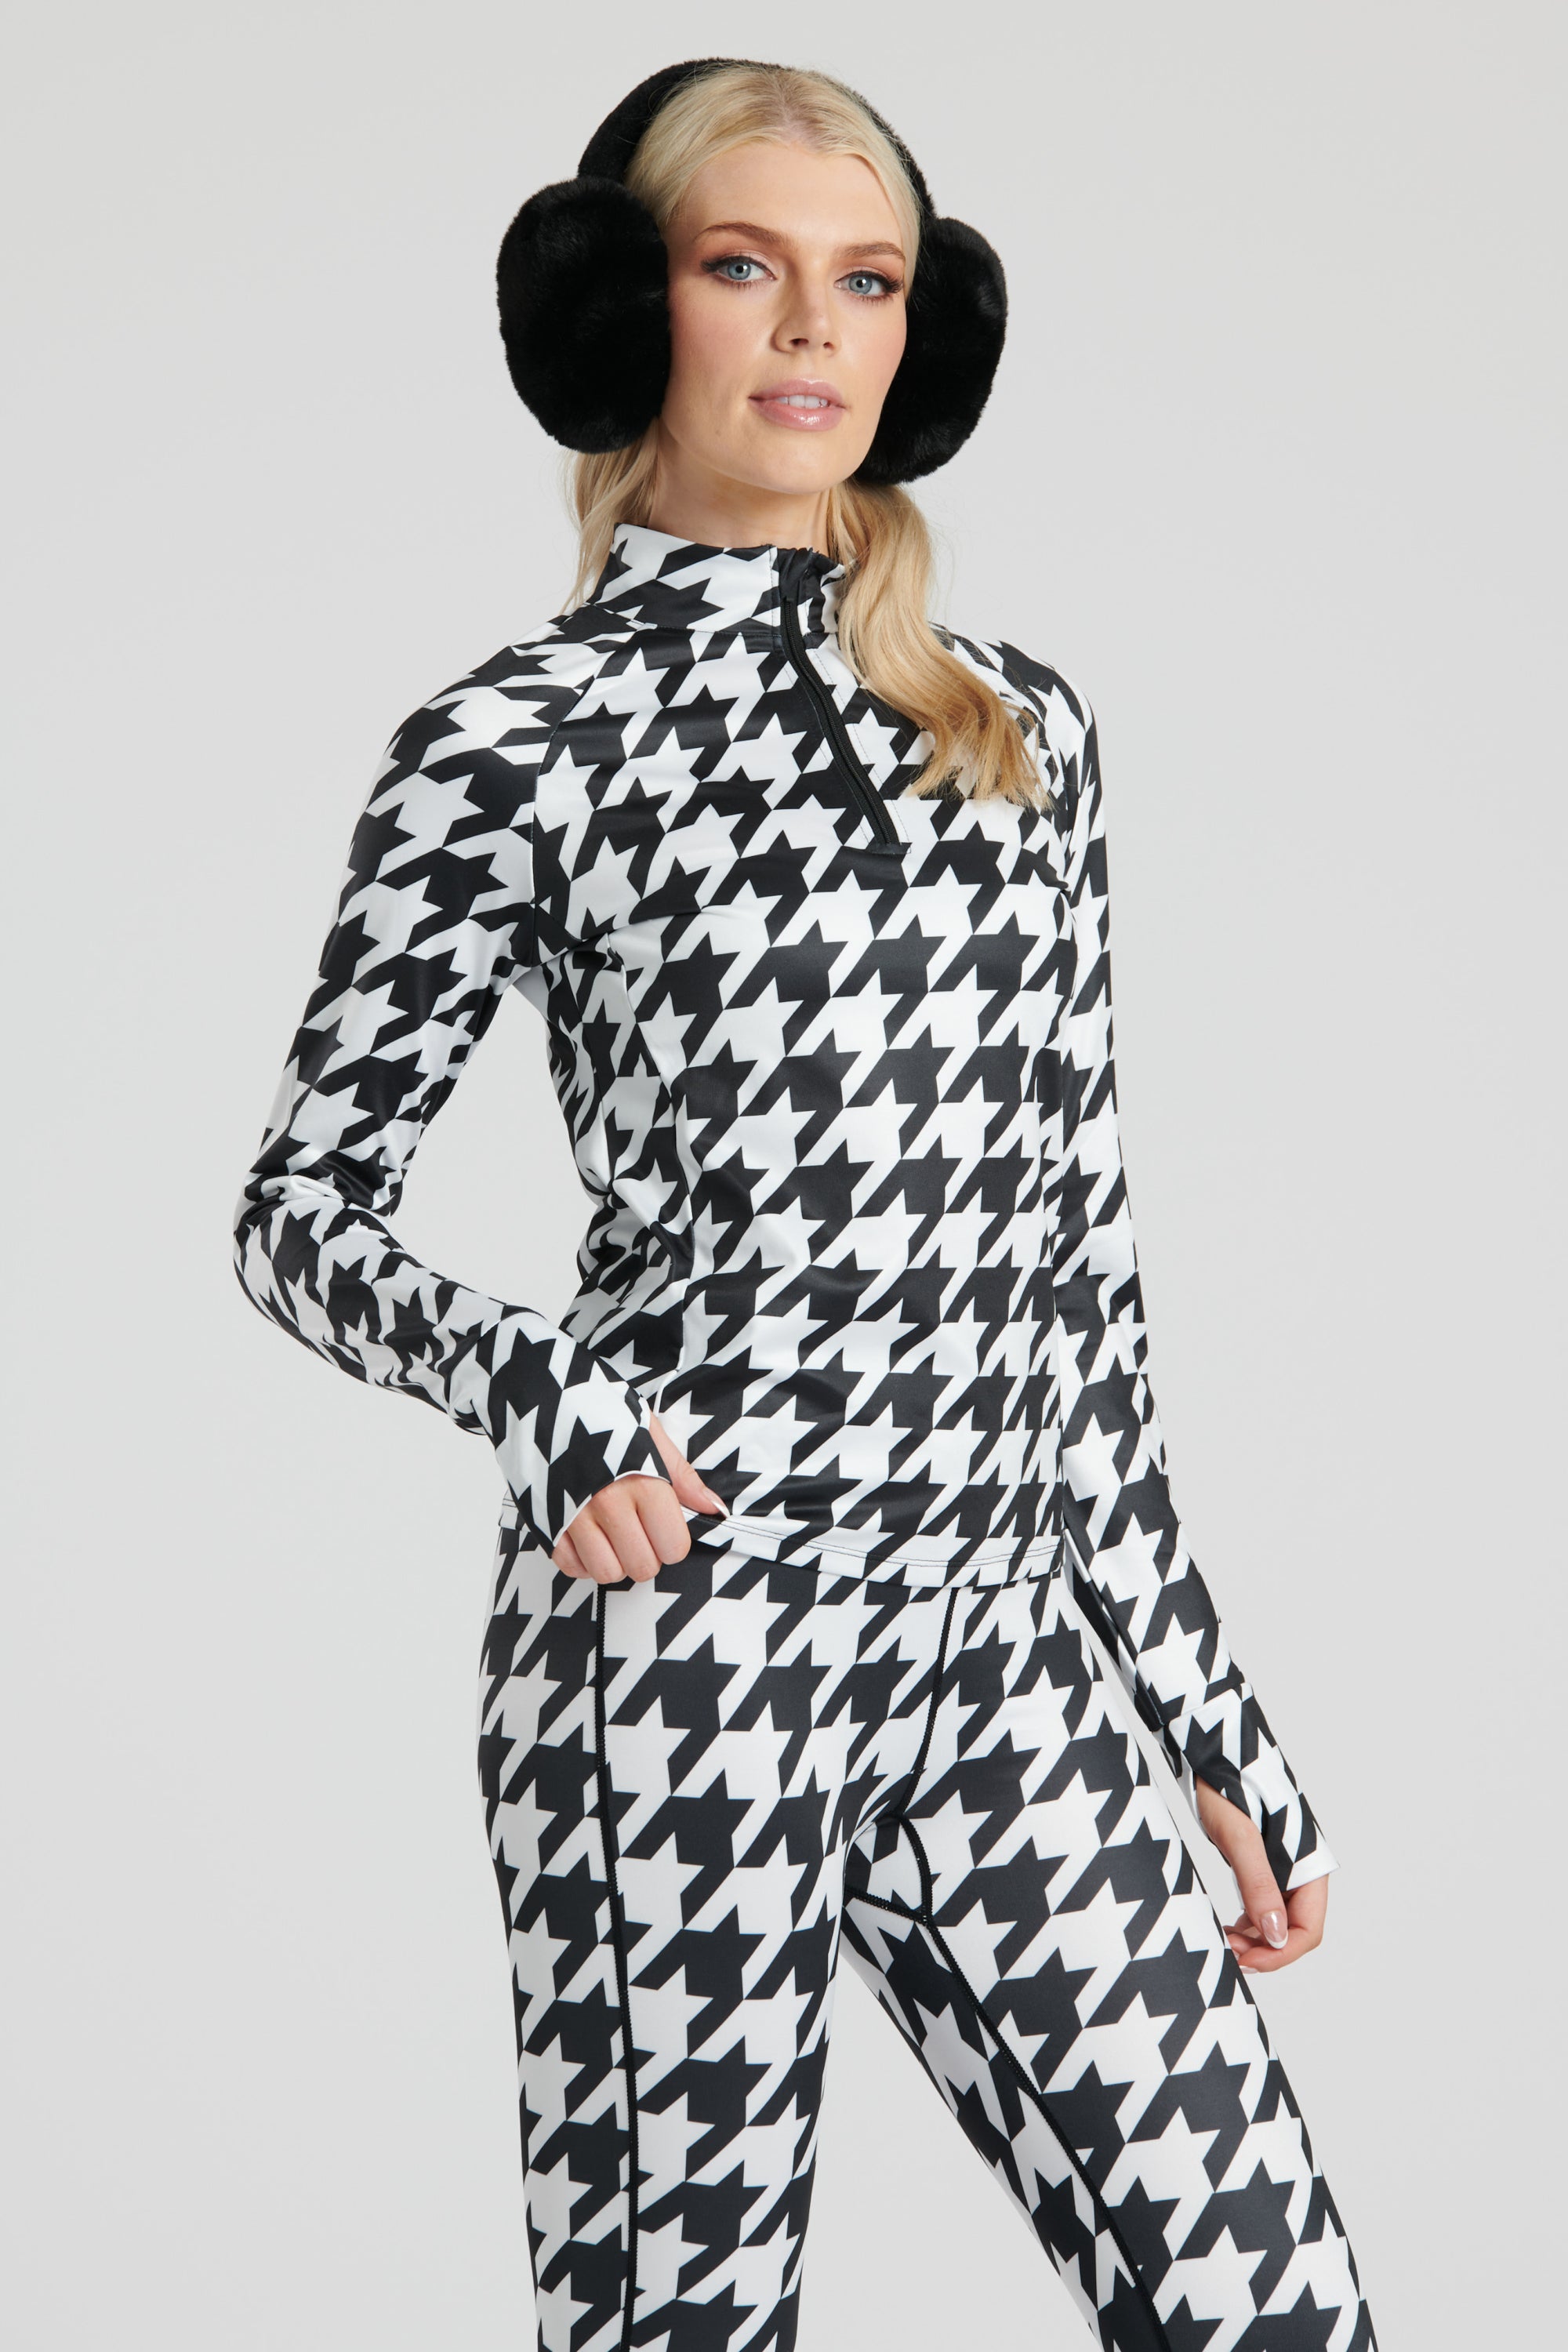 Stush Houndstooth Jumpsuit - Long Sleeve Bodycon